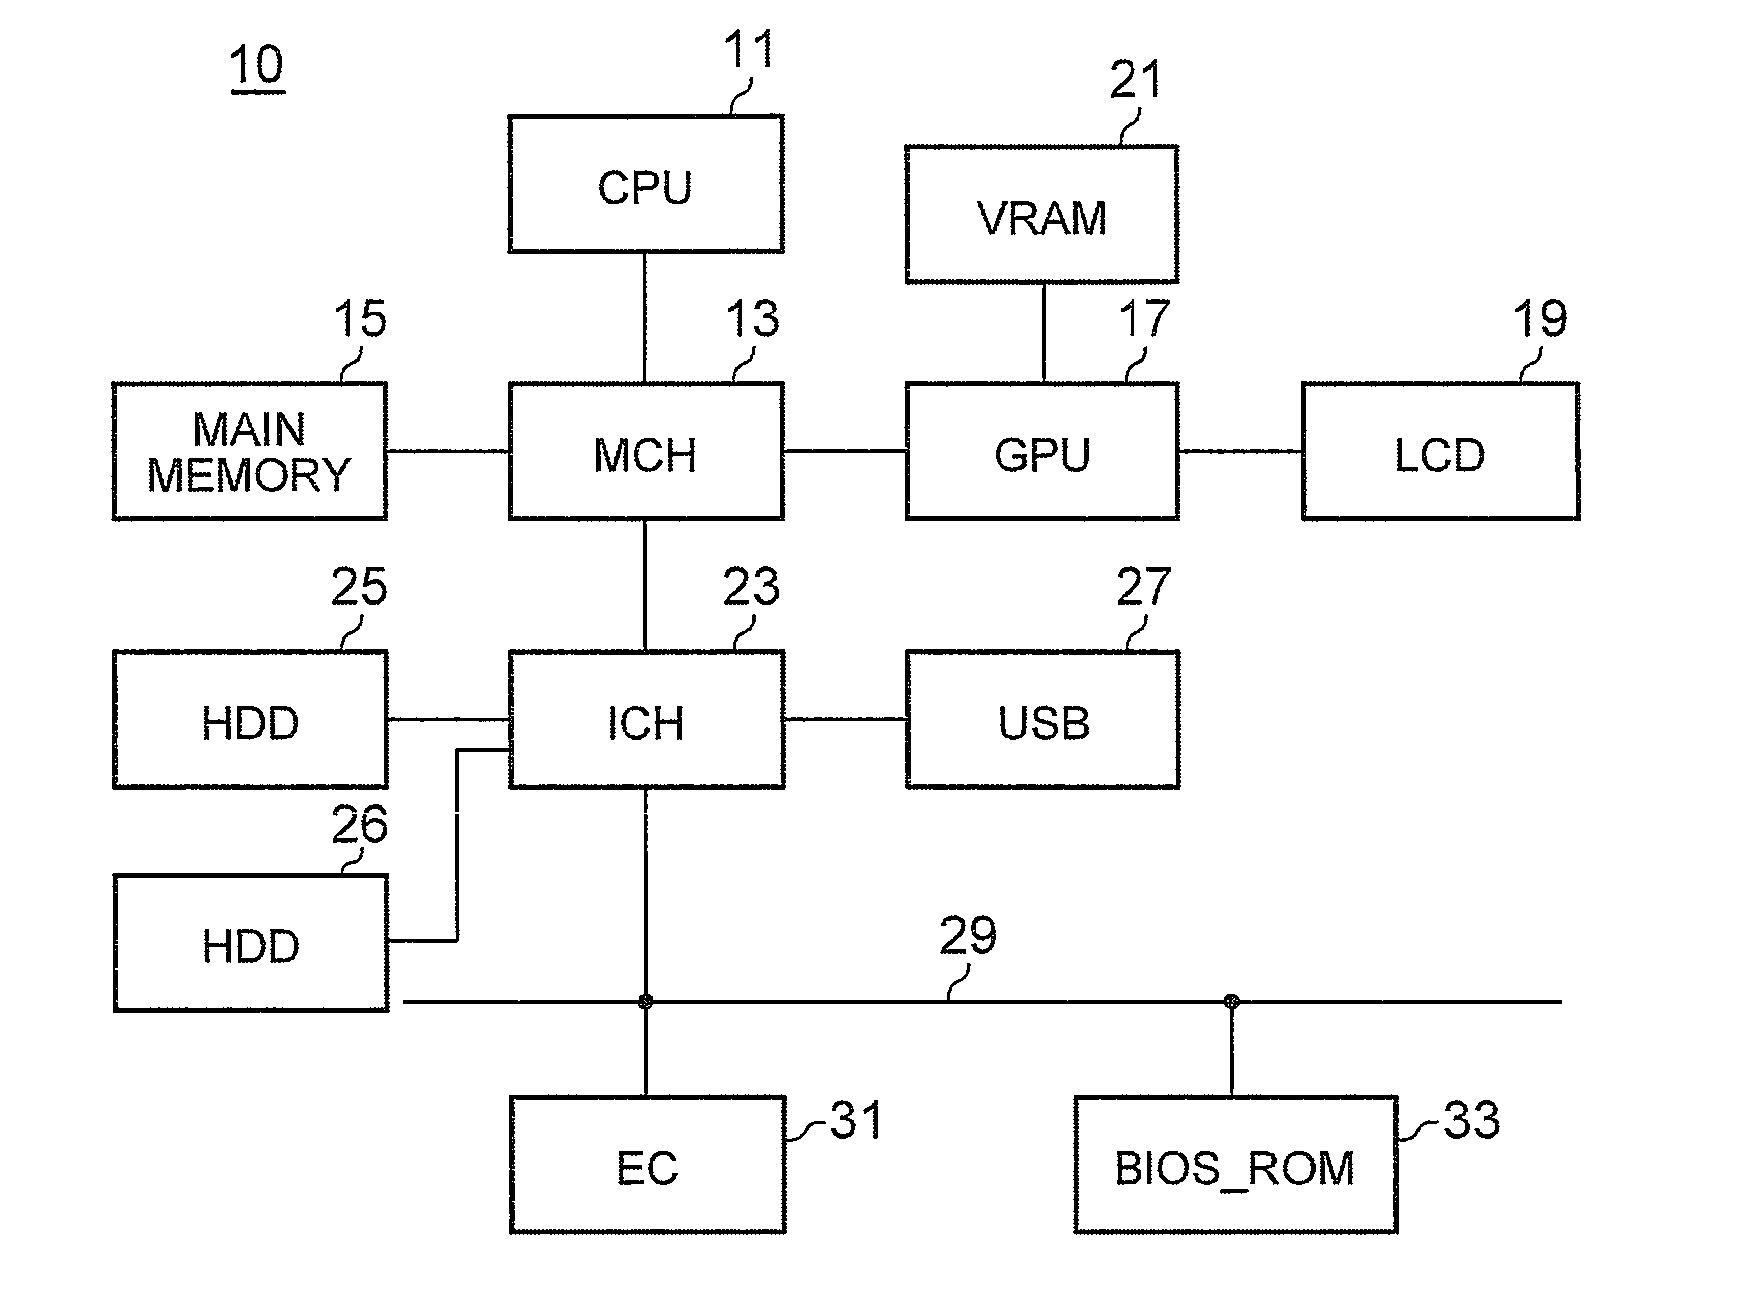 Method for Protecting a Privilege Level of System Management Mode of a Computer System